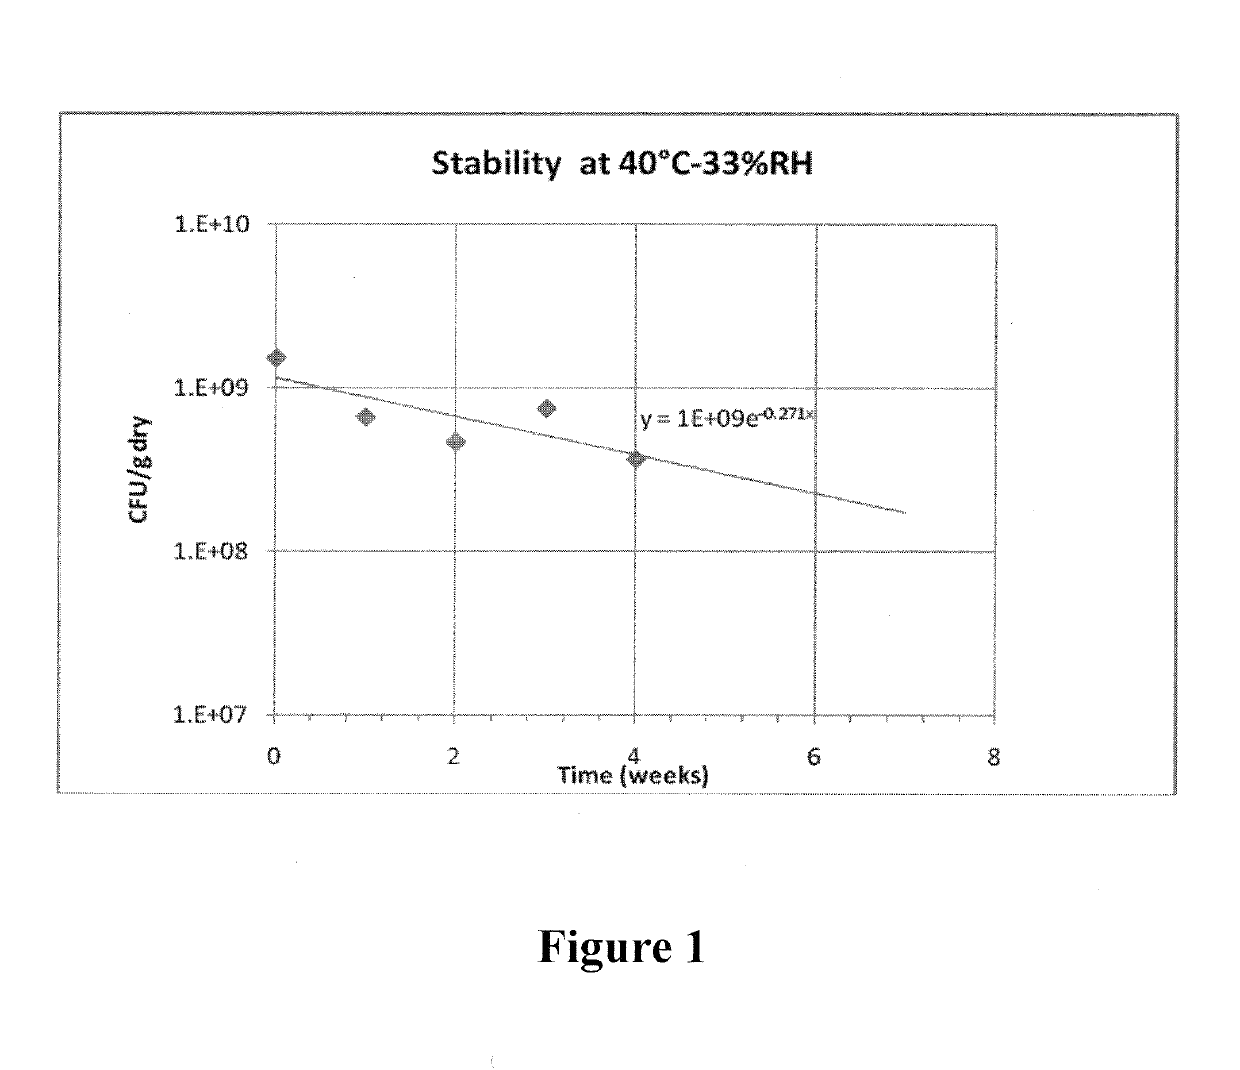 Stable dry powder composition comprising biologically active microorganisms and/or bioactive materials and methods of making